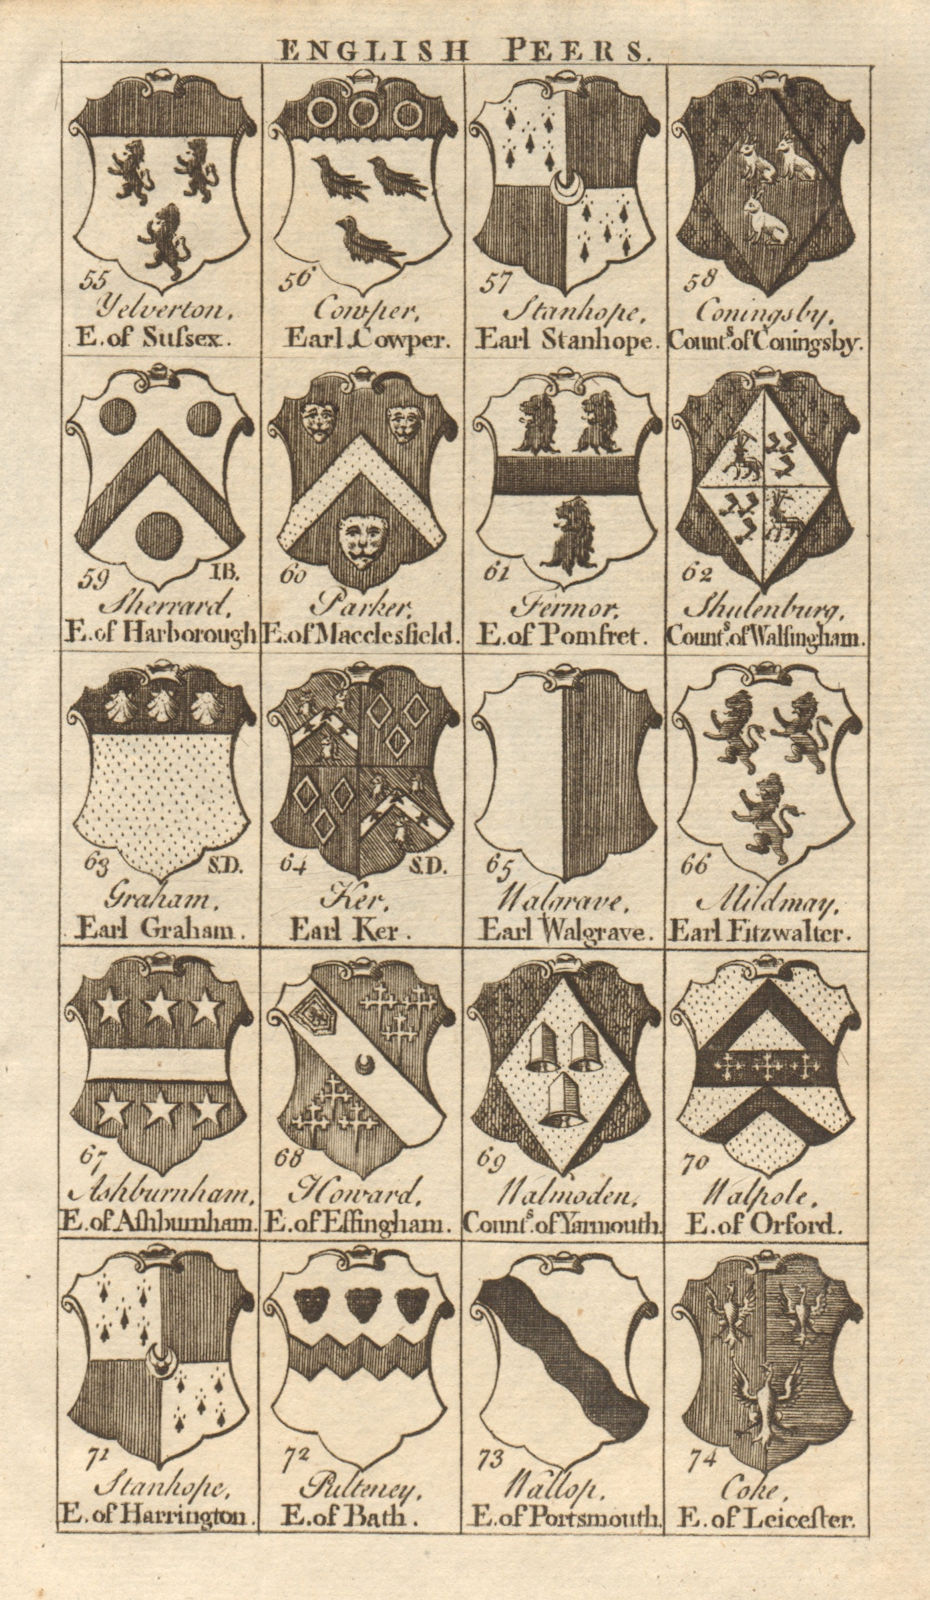 [Coats of arms of] English Peers. Yelverton, E. of Sussex - Cowper ...